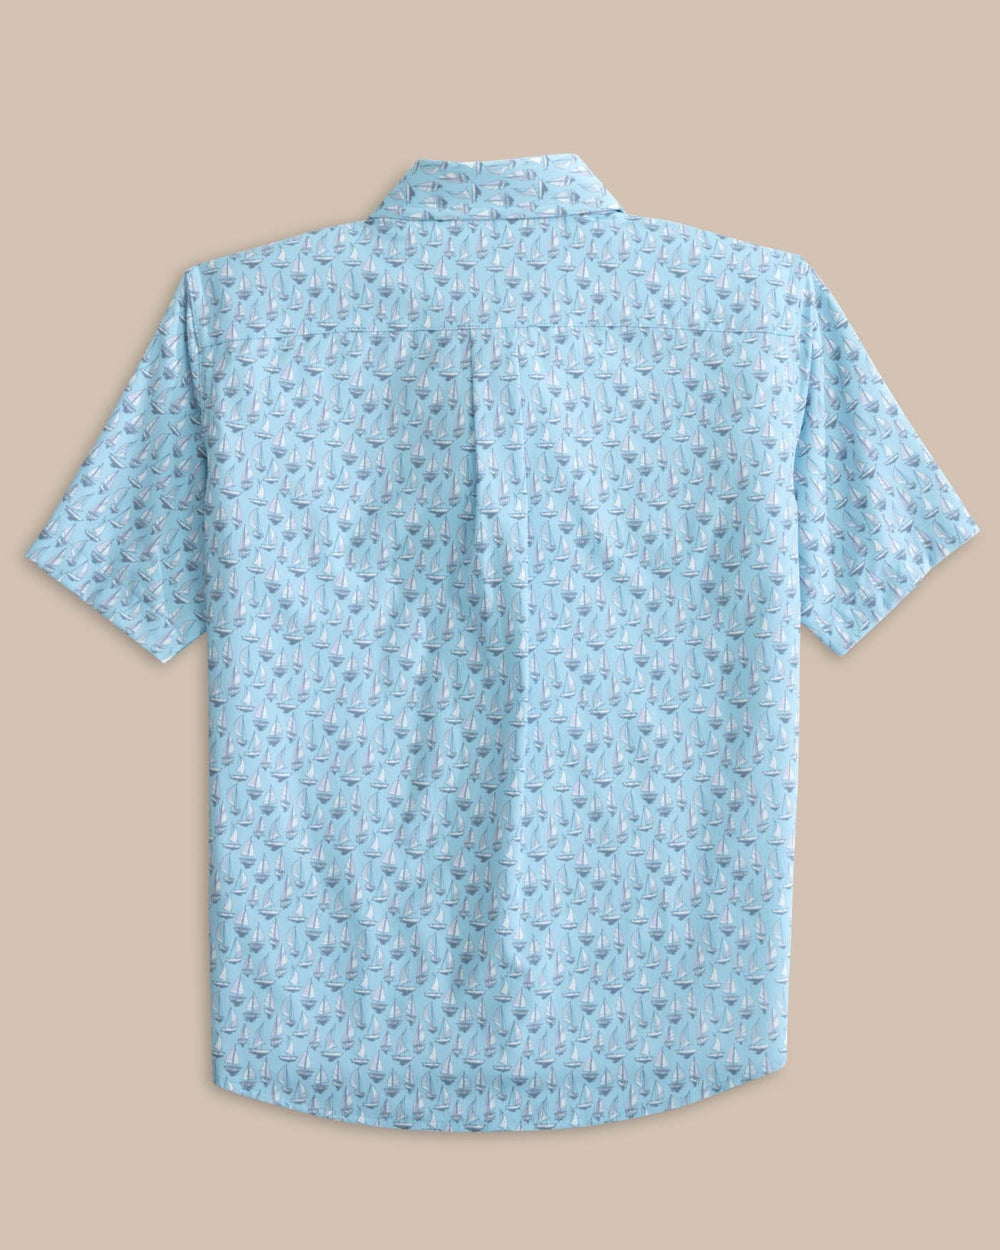 The back view of the Southern Tide Youth Intercoastal Forget A-Boat It Short Sleeve Sport Shirt by Southern Tide - Clearwater Blue